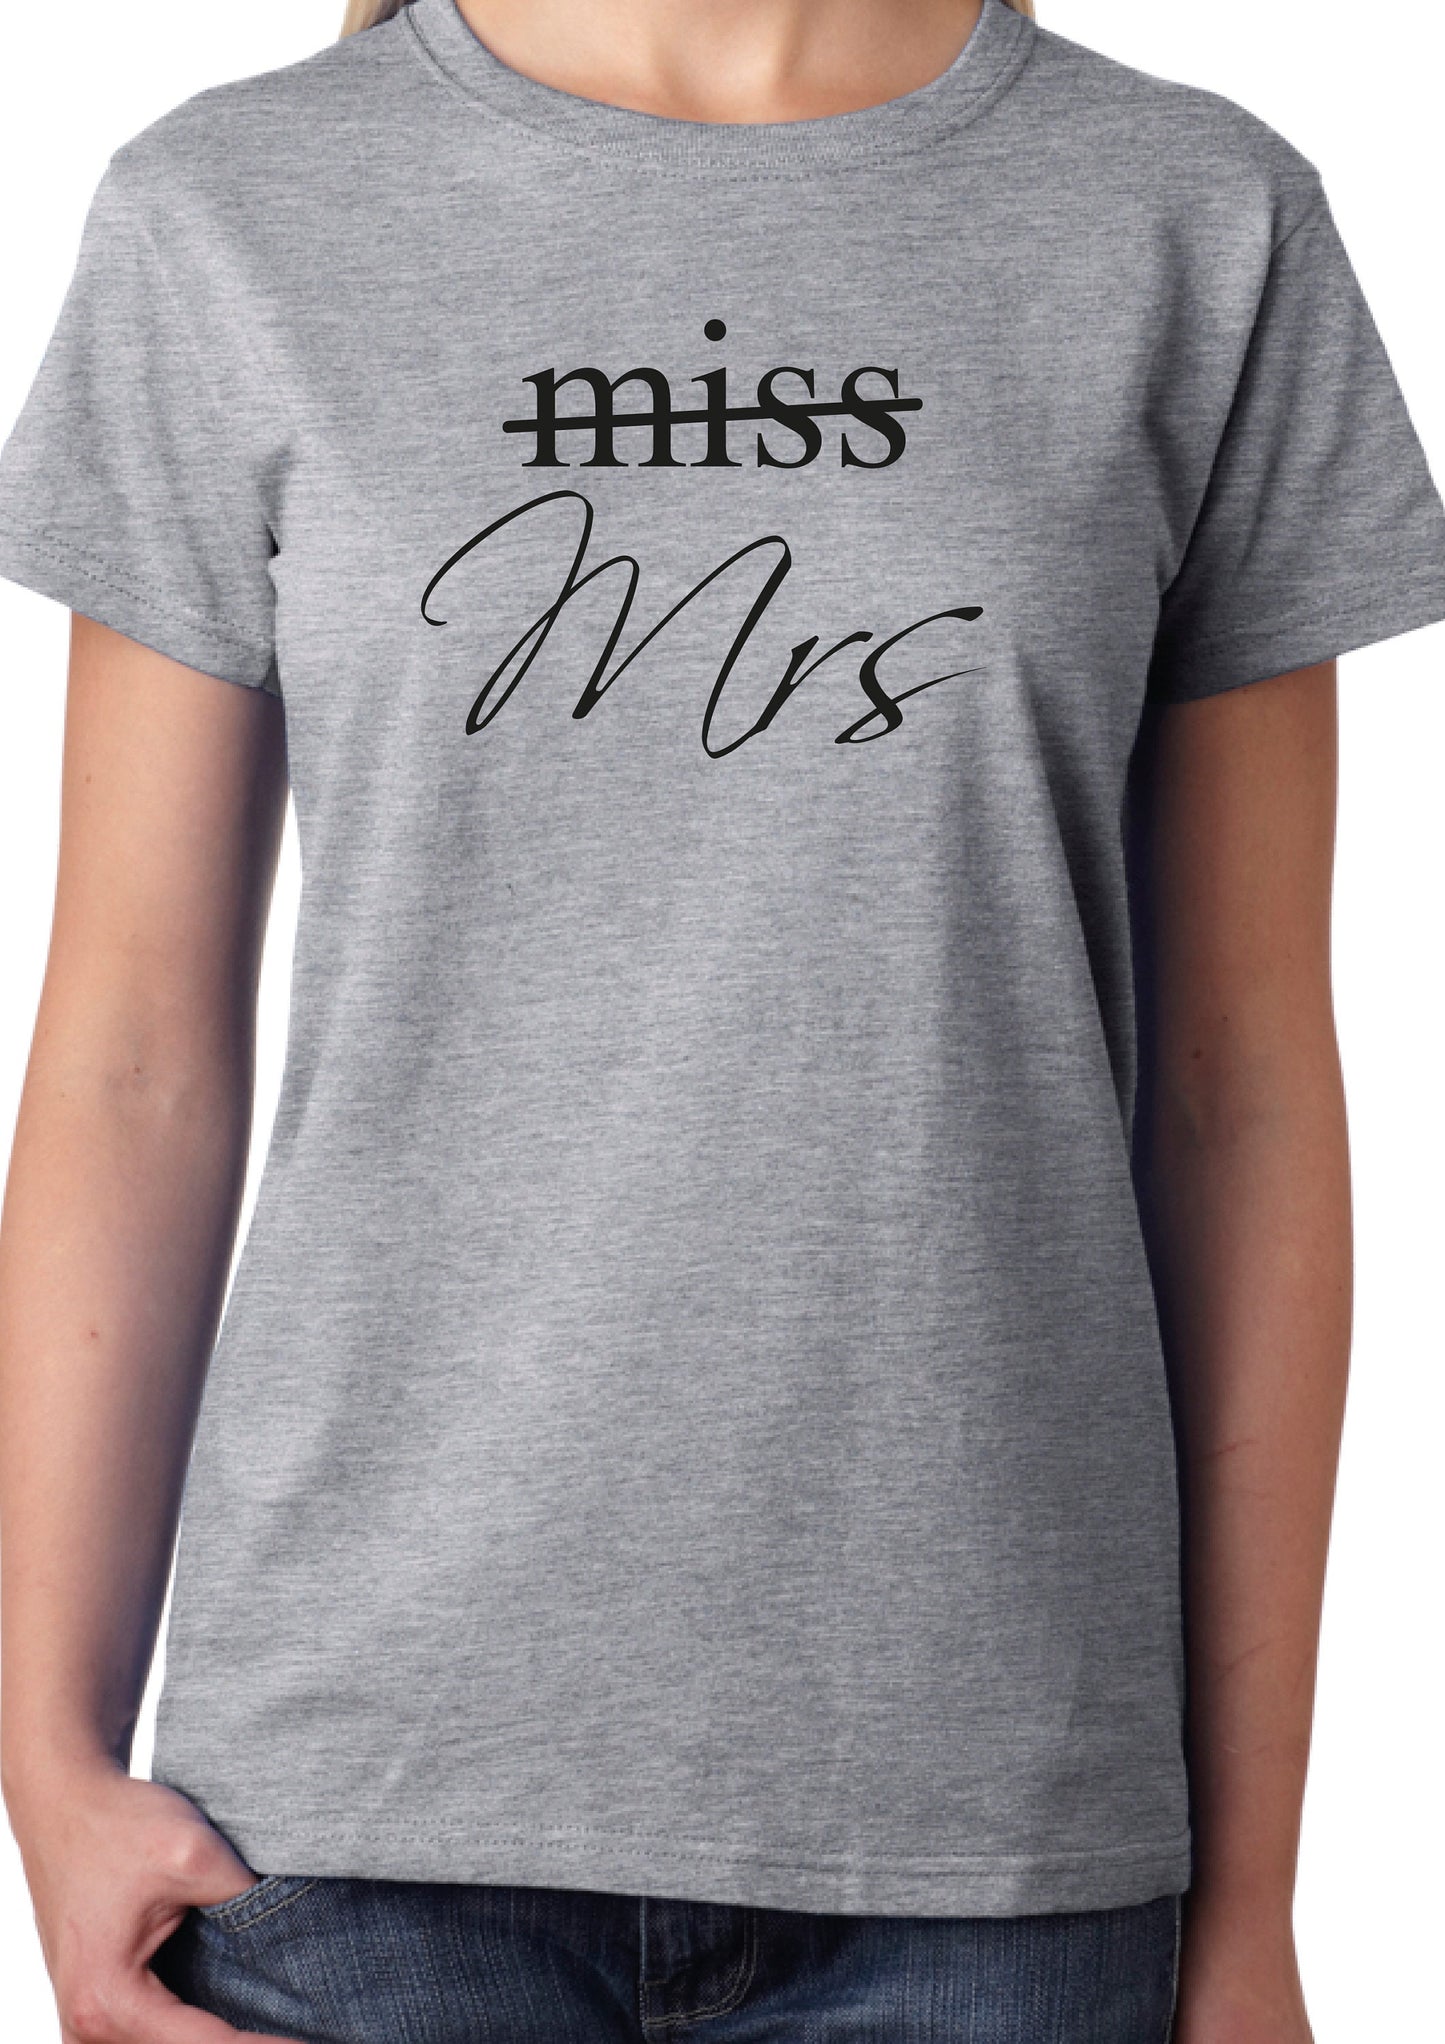 Miss / Mrs T-Shirt, Ladies or Unisex Funny Cool Engagement Gift